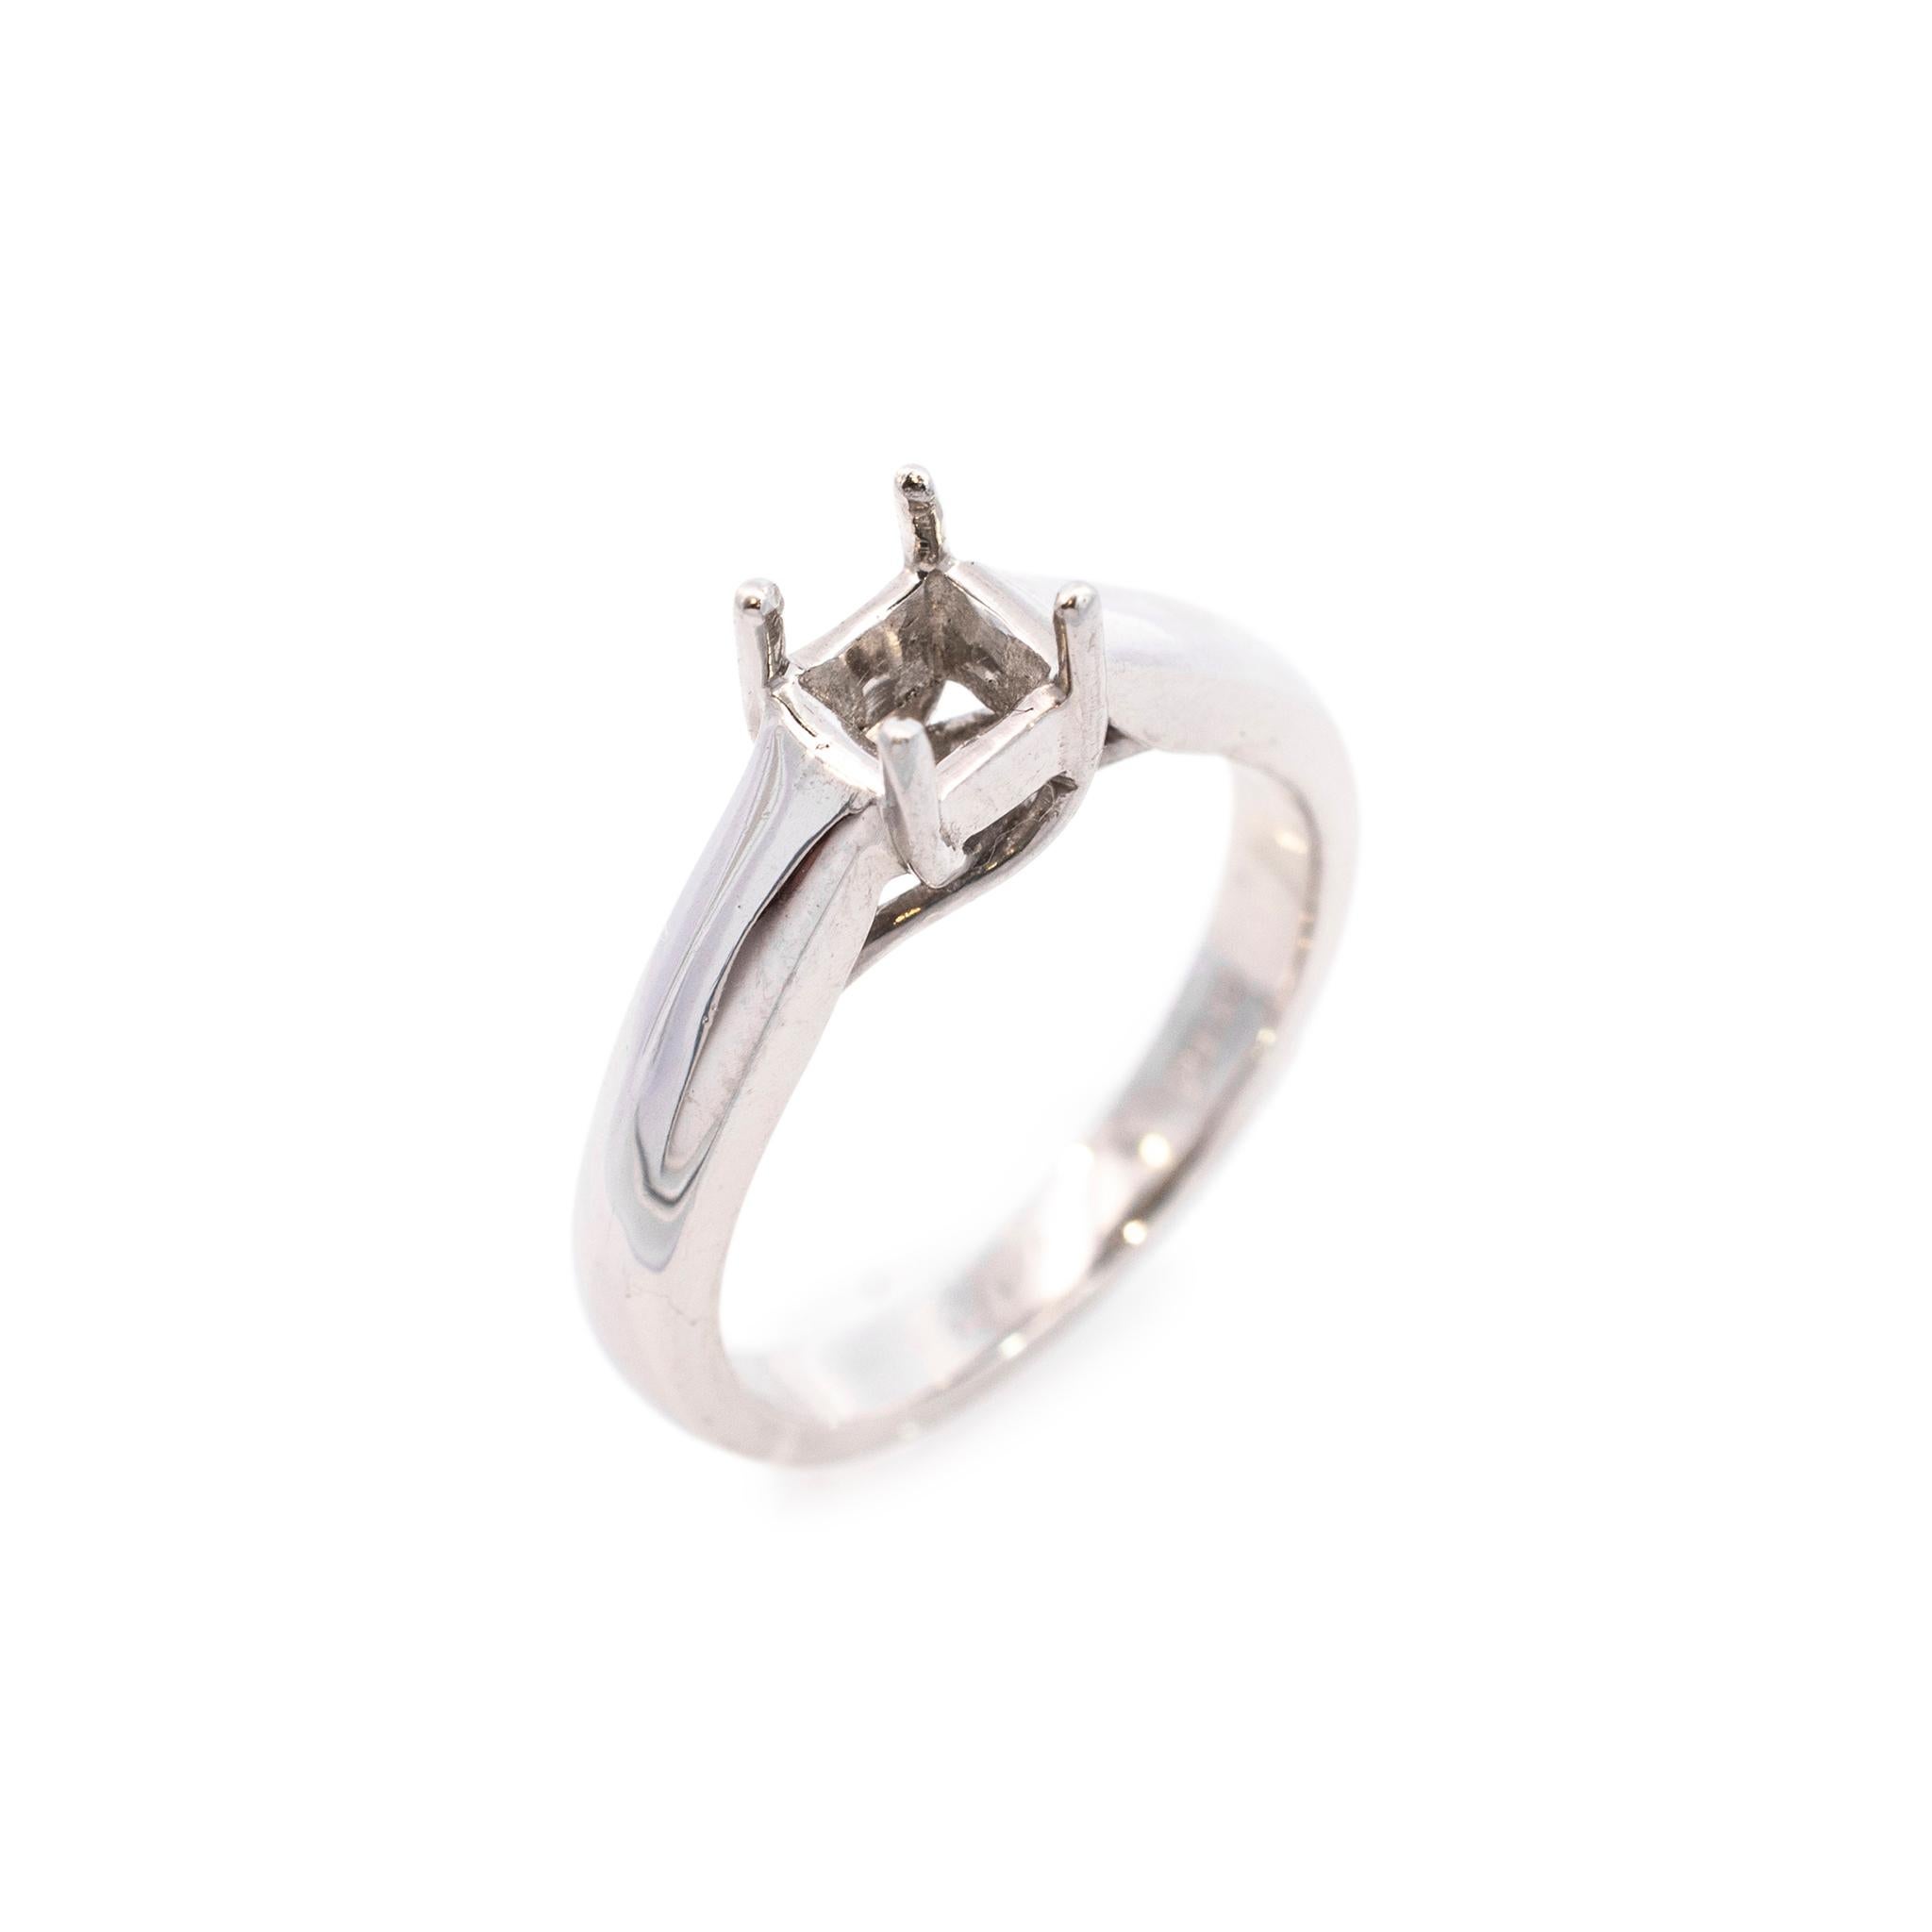 One lady's custom made polished platinum, solitaire engagement, semi-mount ring with a soft-square shank. The ring is a size 6.5. The ring weighs a total of 8.40 grams. Engraved with 